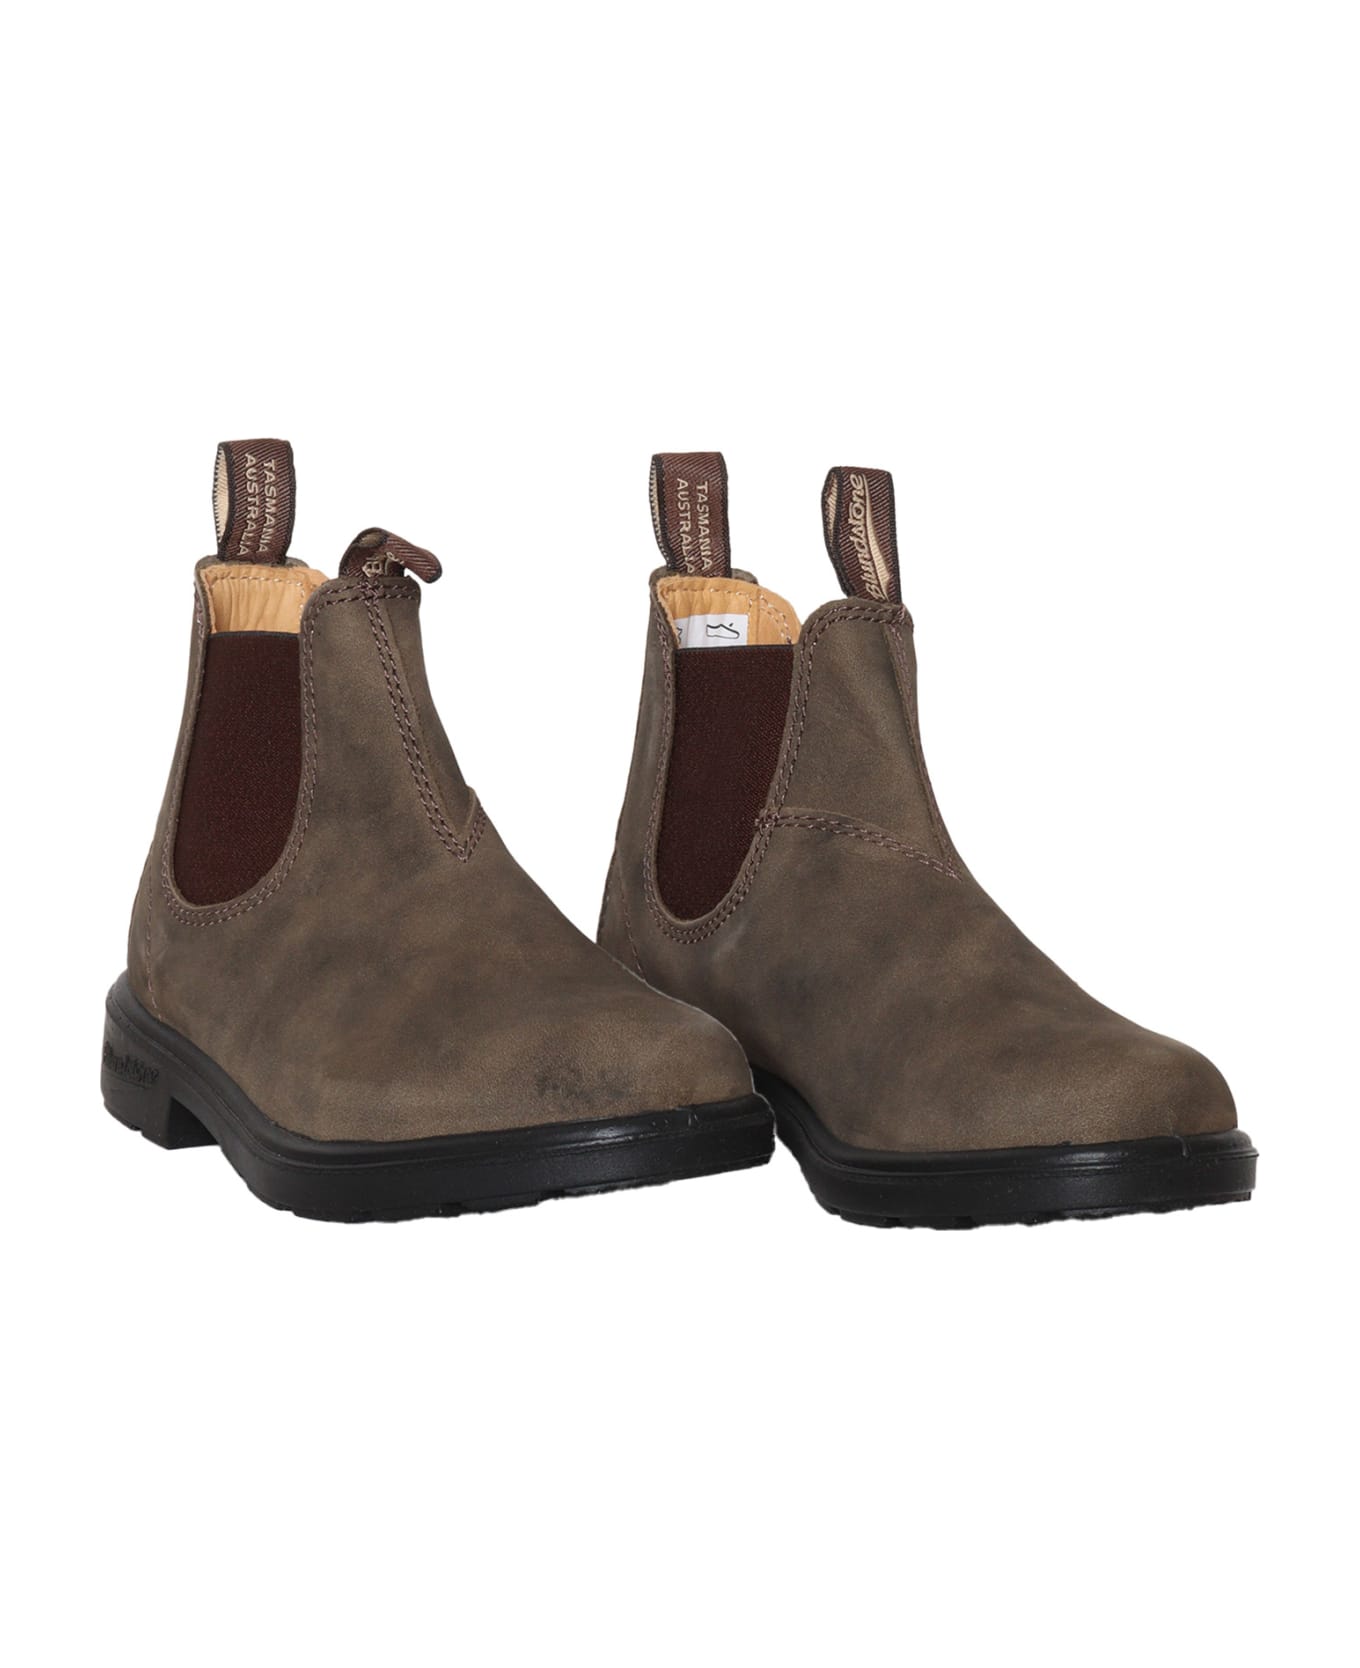 Blundstone Rustic Ankle Boots - BROWN